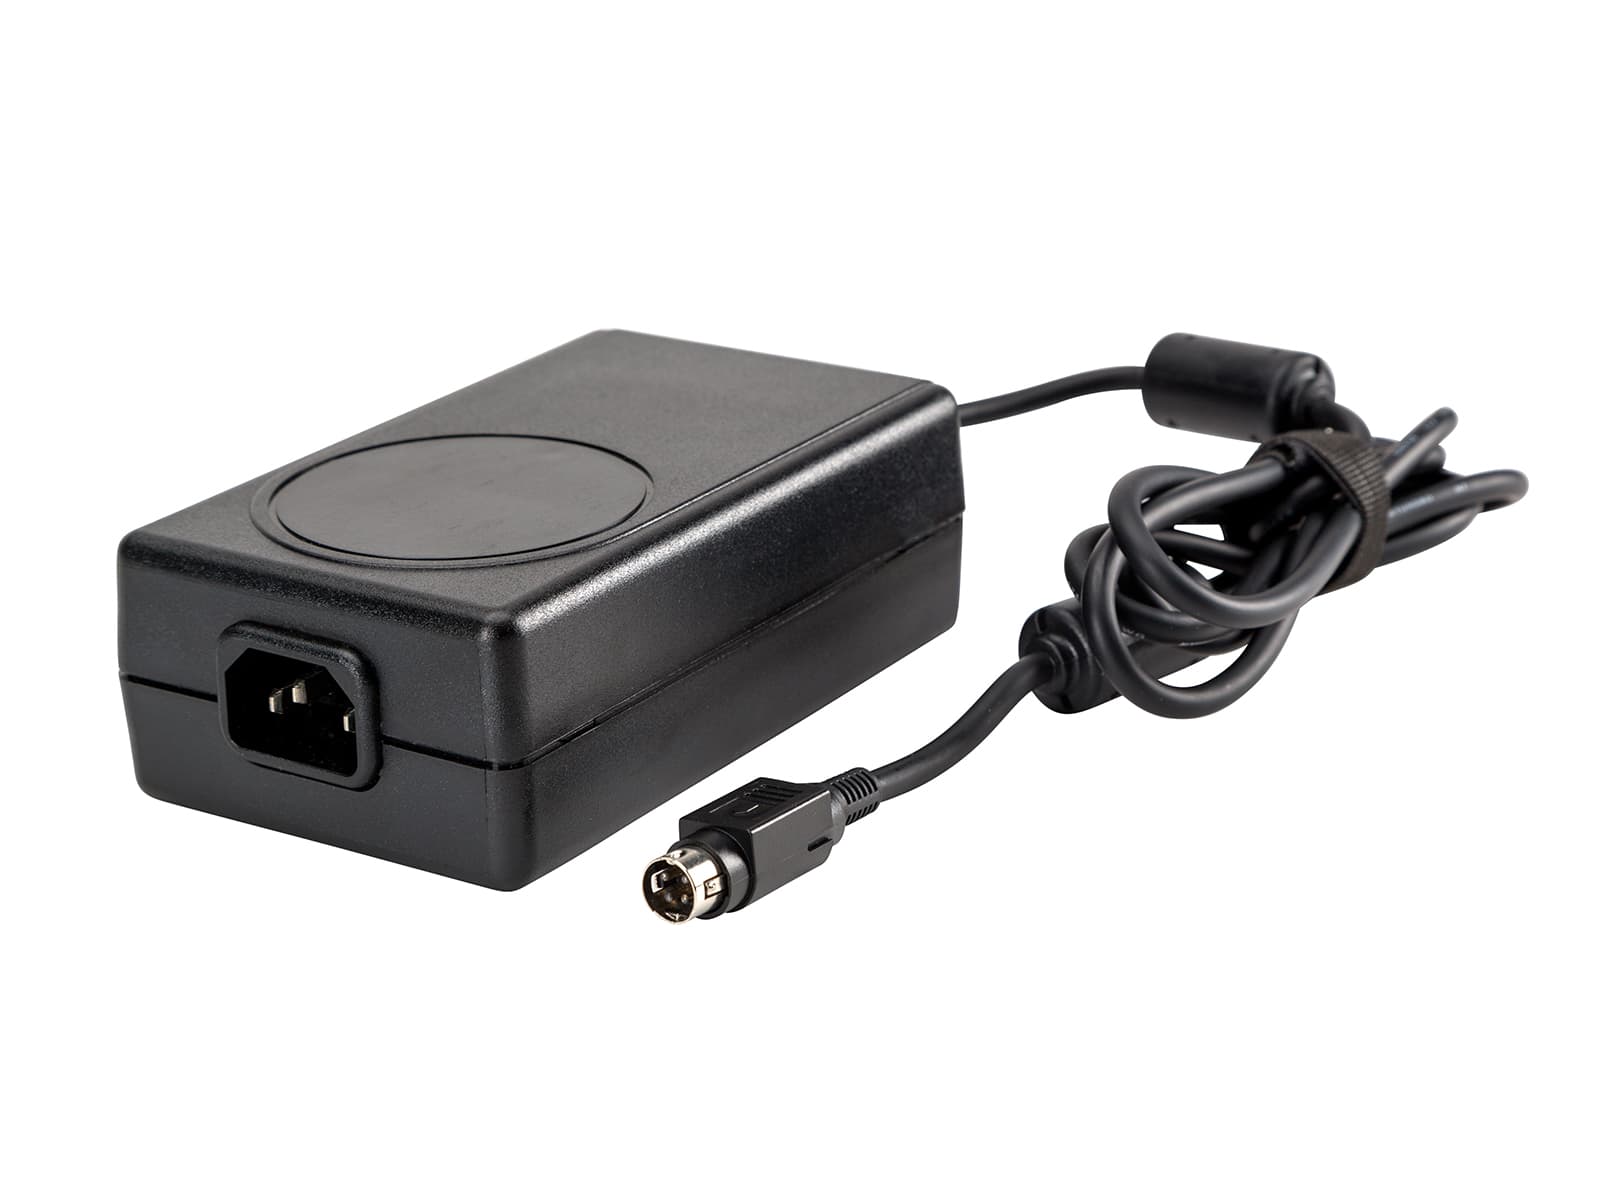 BridgePower Corp. 24V 3.75A Switching Power Adapter for Barco Displays JMW190KB2400F11 Monitors.com 